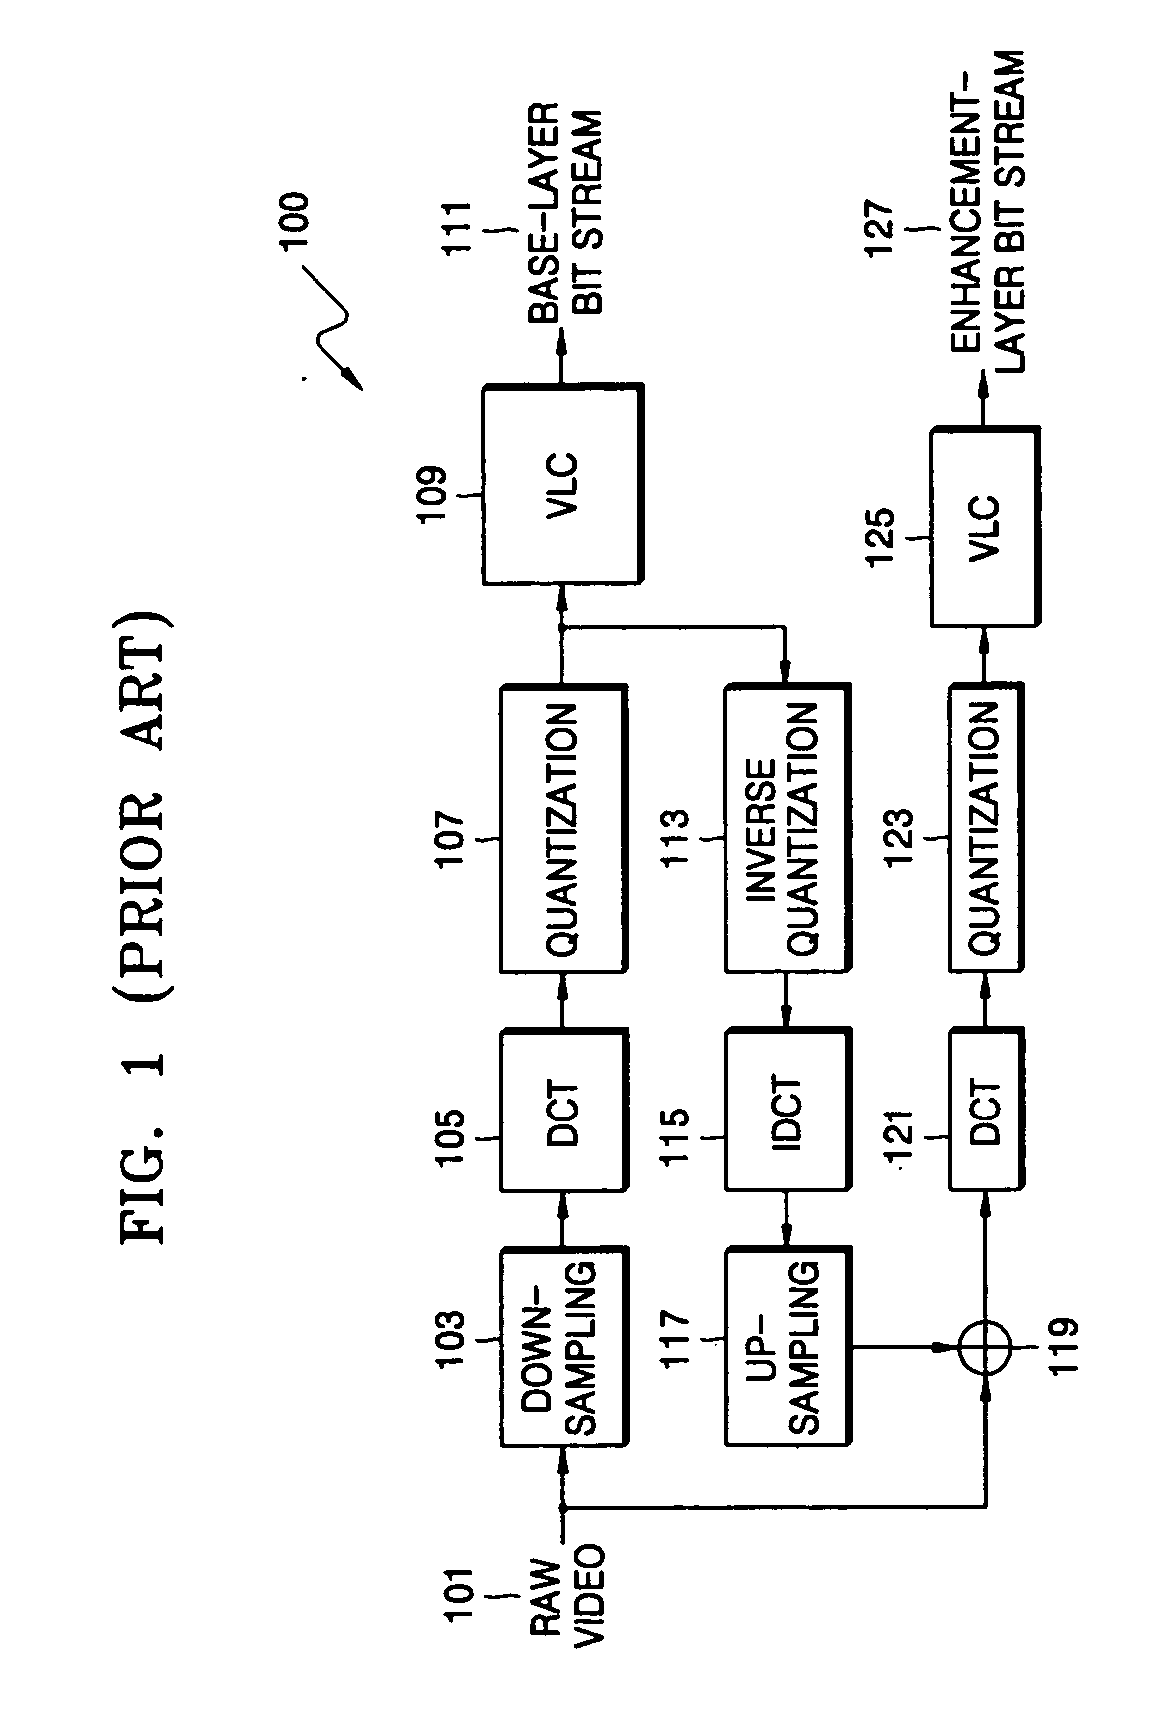 Video encoding and decoding methods and apparatuses